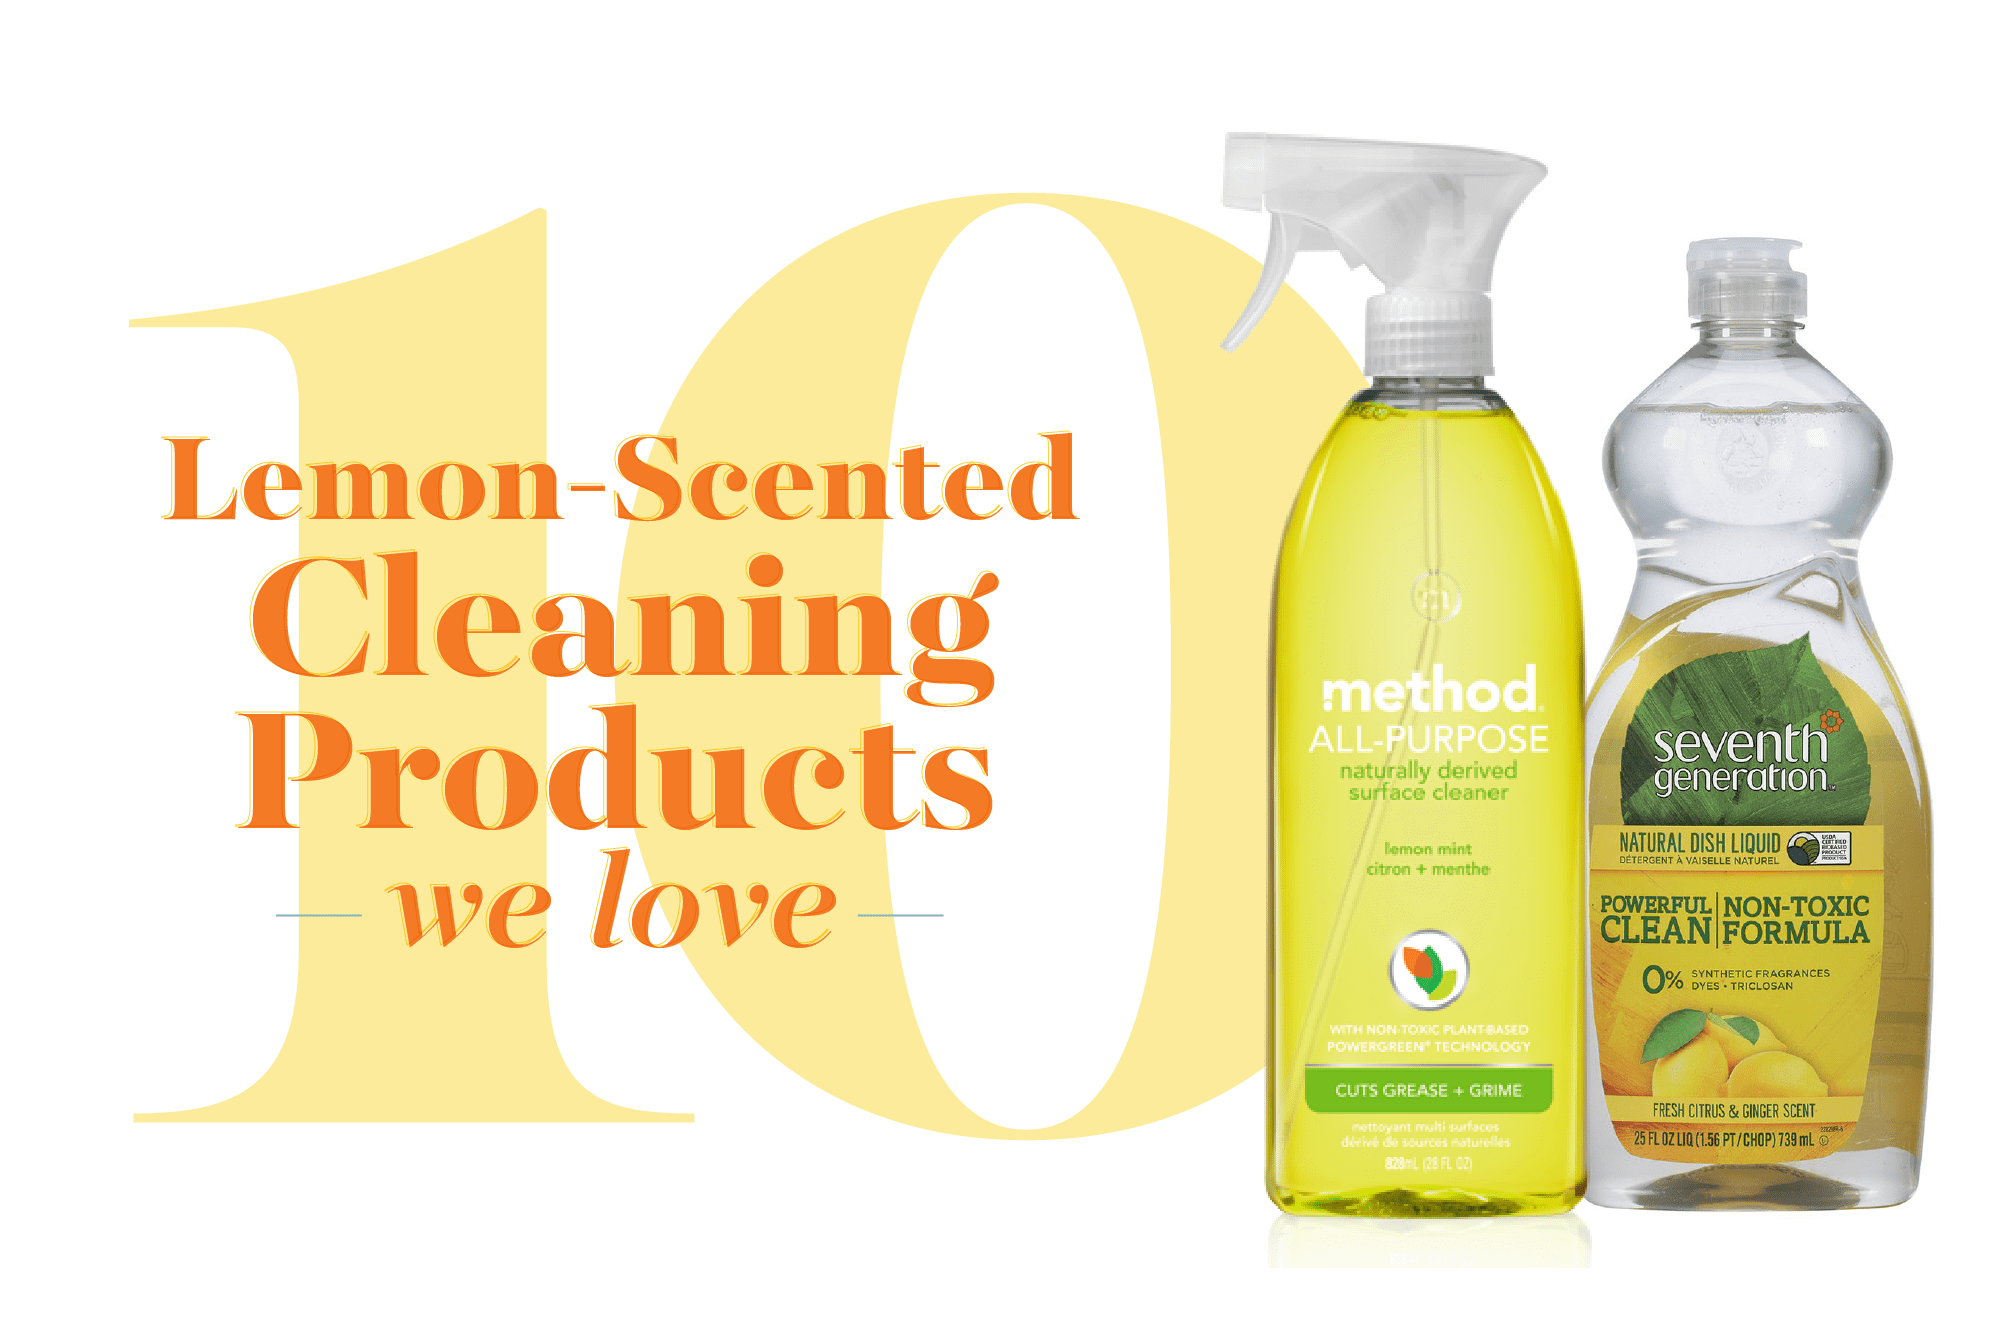 10 Lemon-Scented Cleaning Products to Try